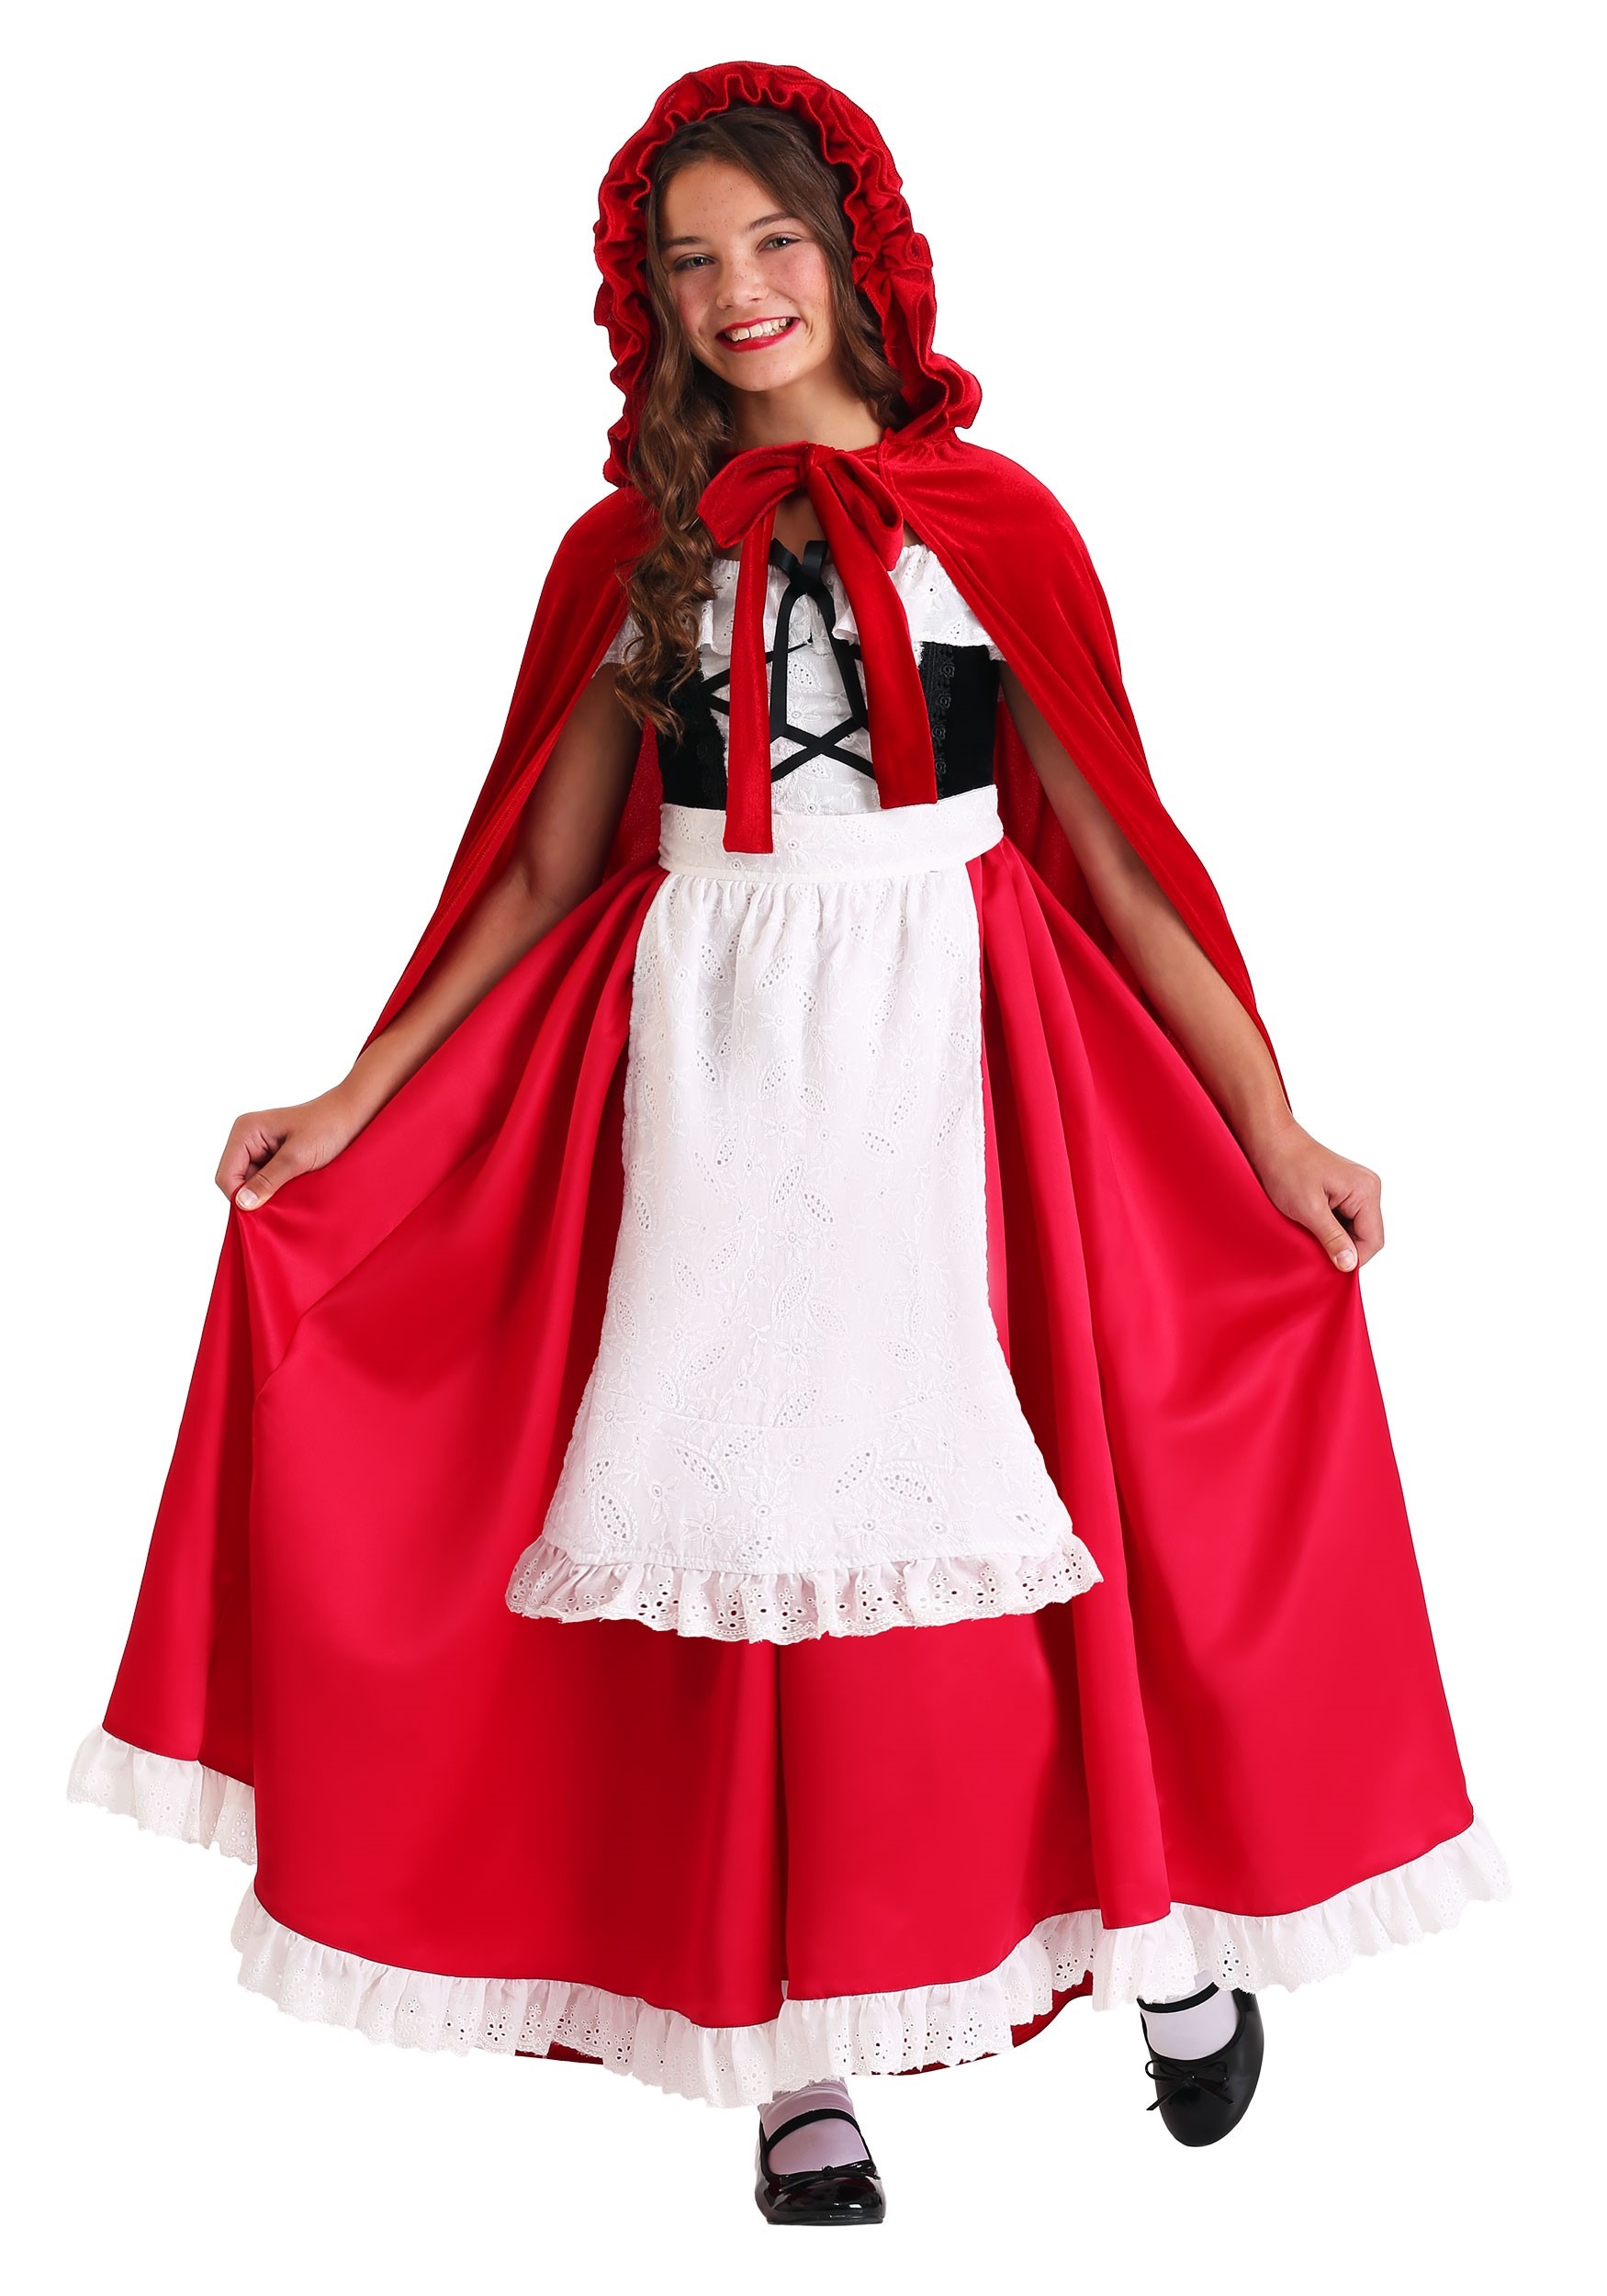 Child's Deluxe Red Riding Hood Costume